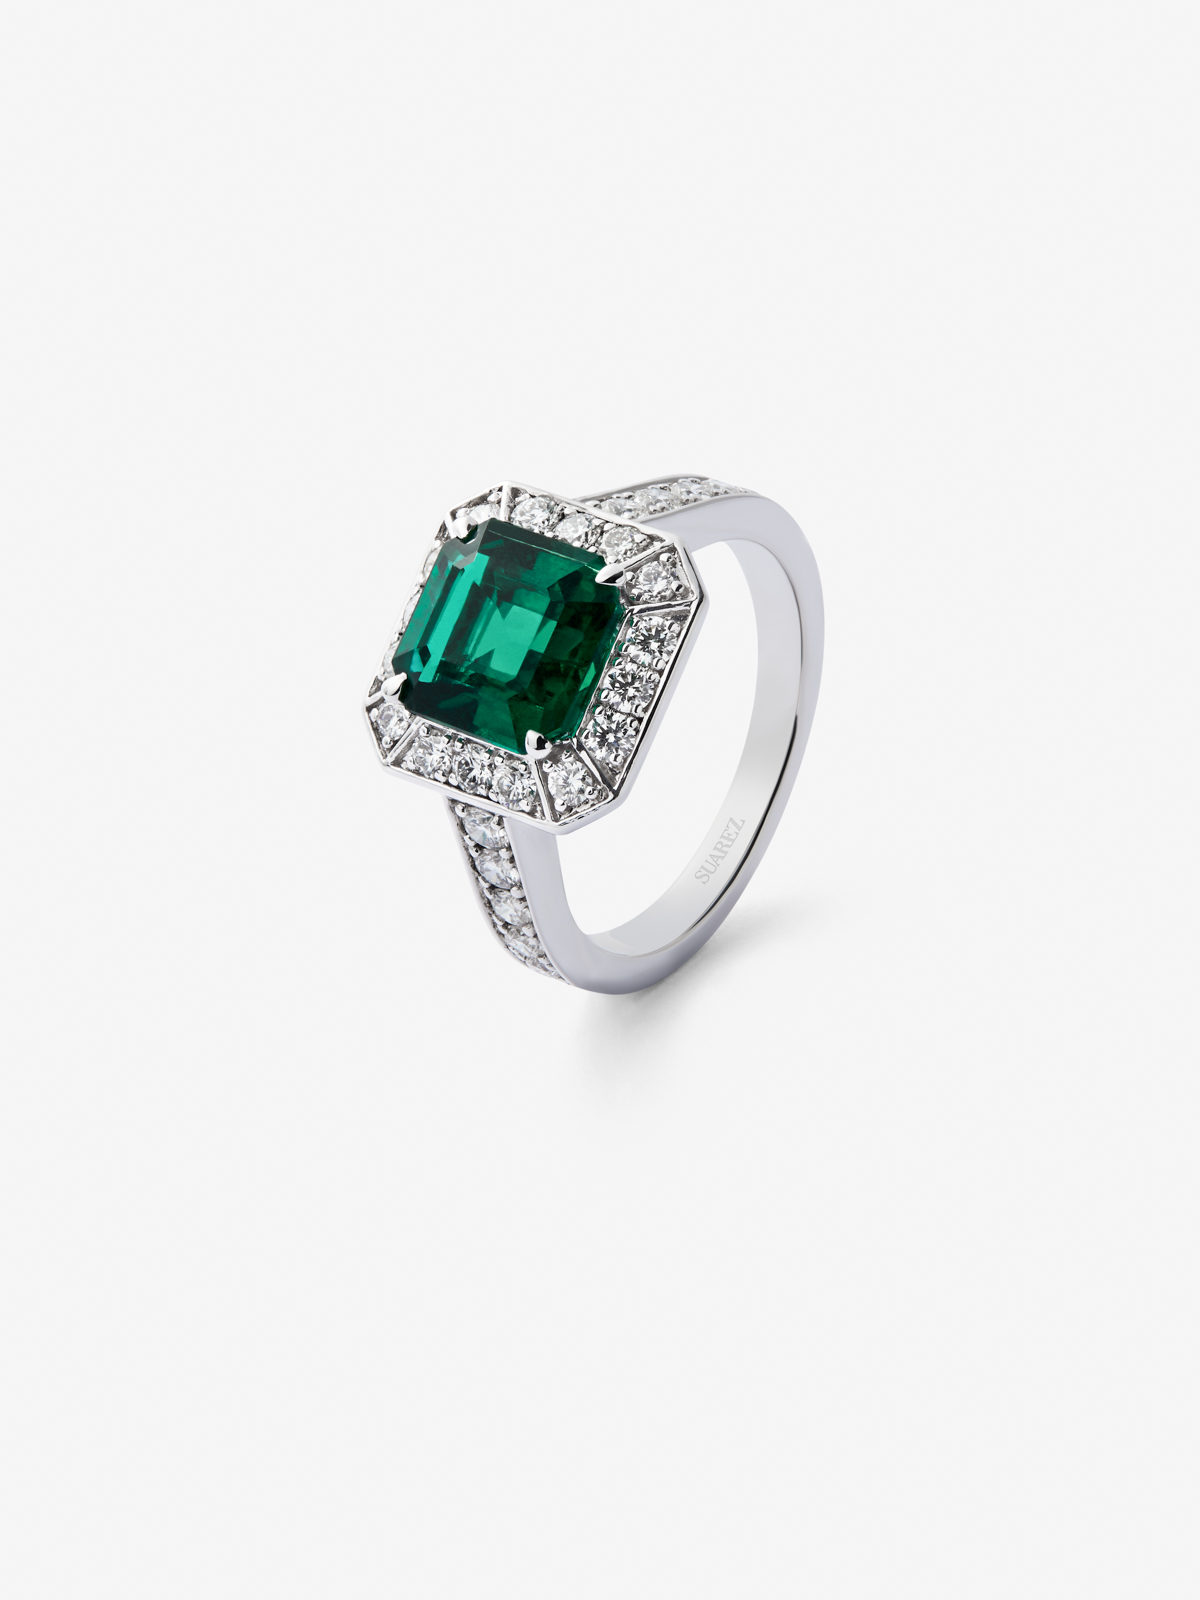 18K White Gold Ring with Green Esmerald in Emerald Size 2.6 CTS and white diamonds in Blind Size of 0.7 CTS